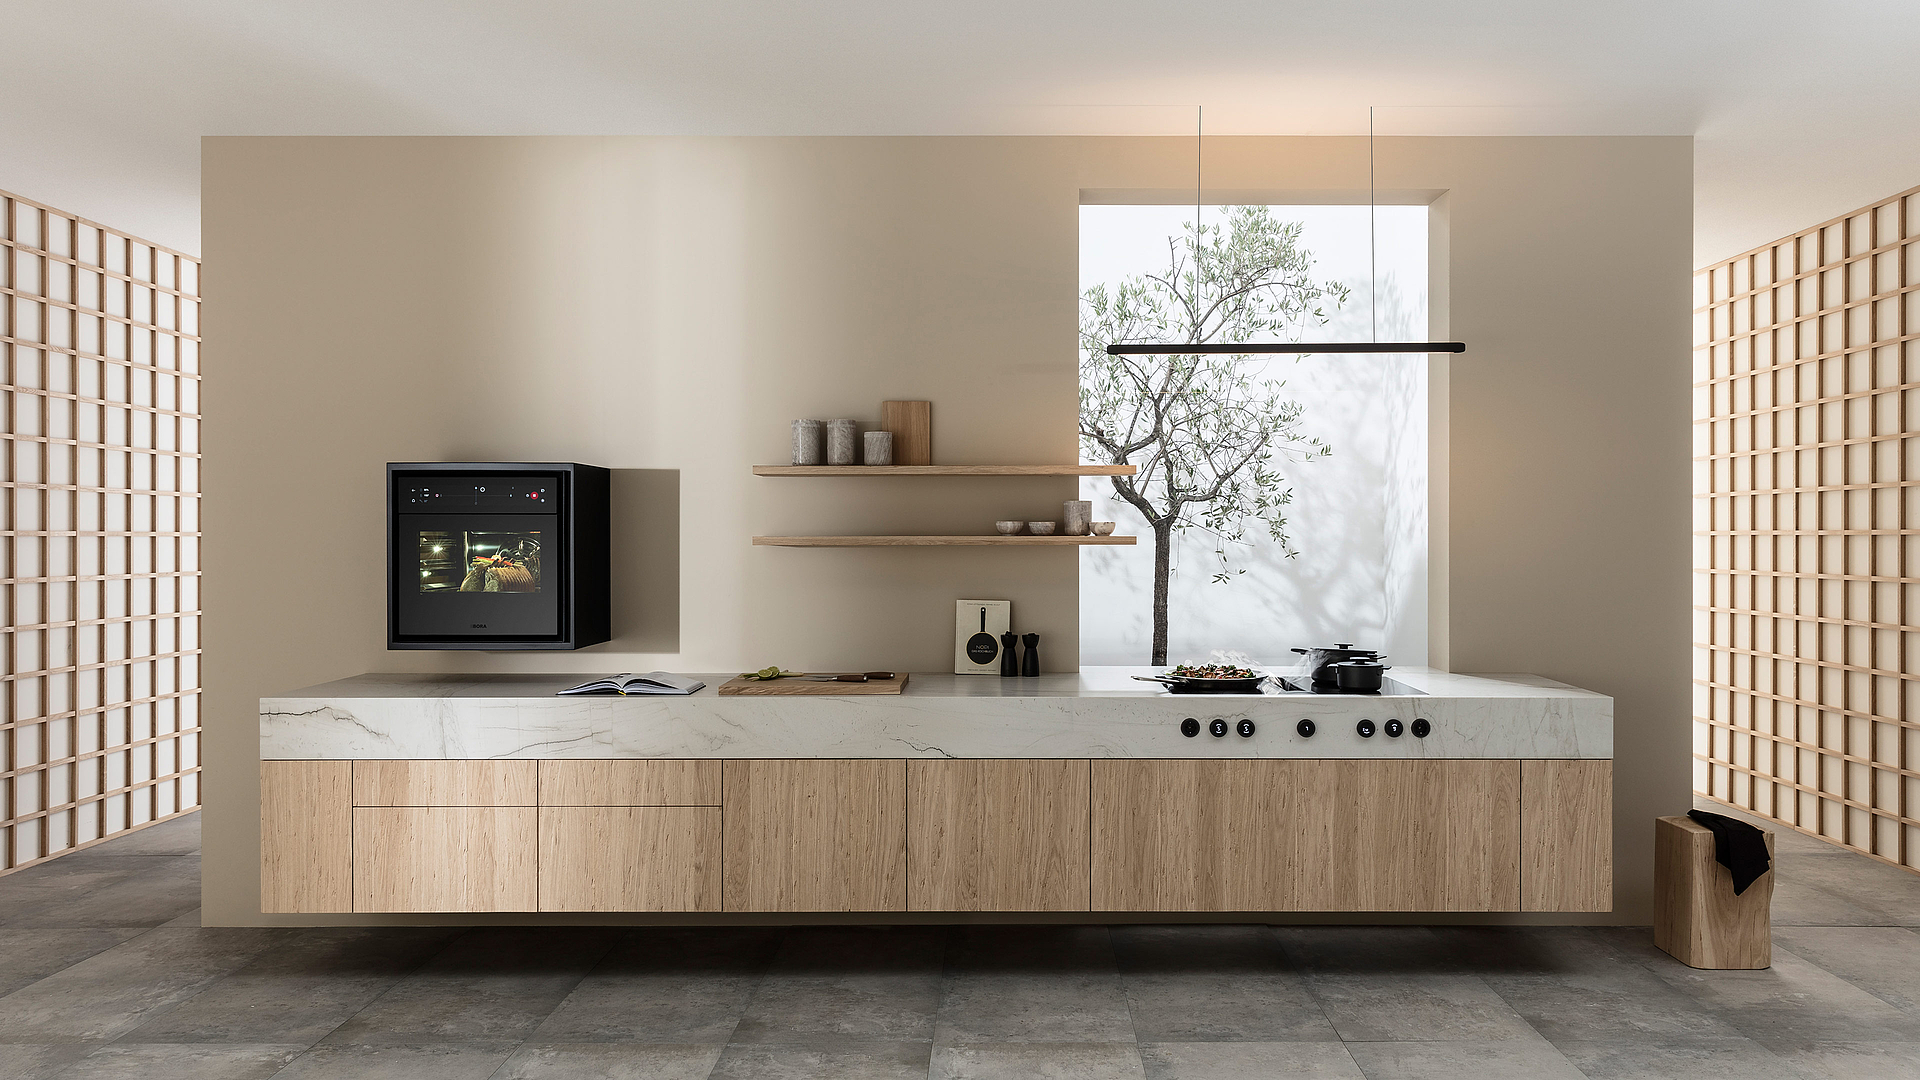 BORA showcases its new products and expands the kitchen as a living space